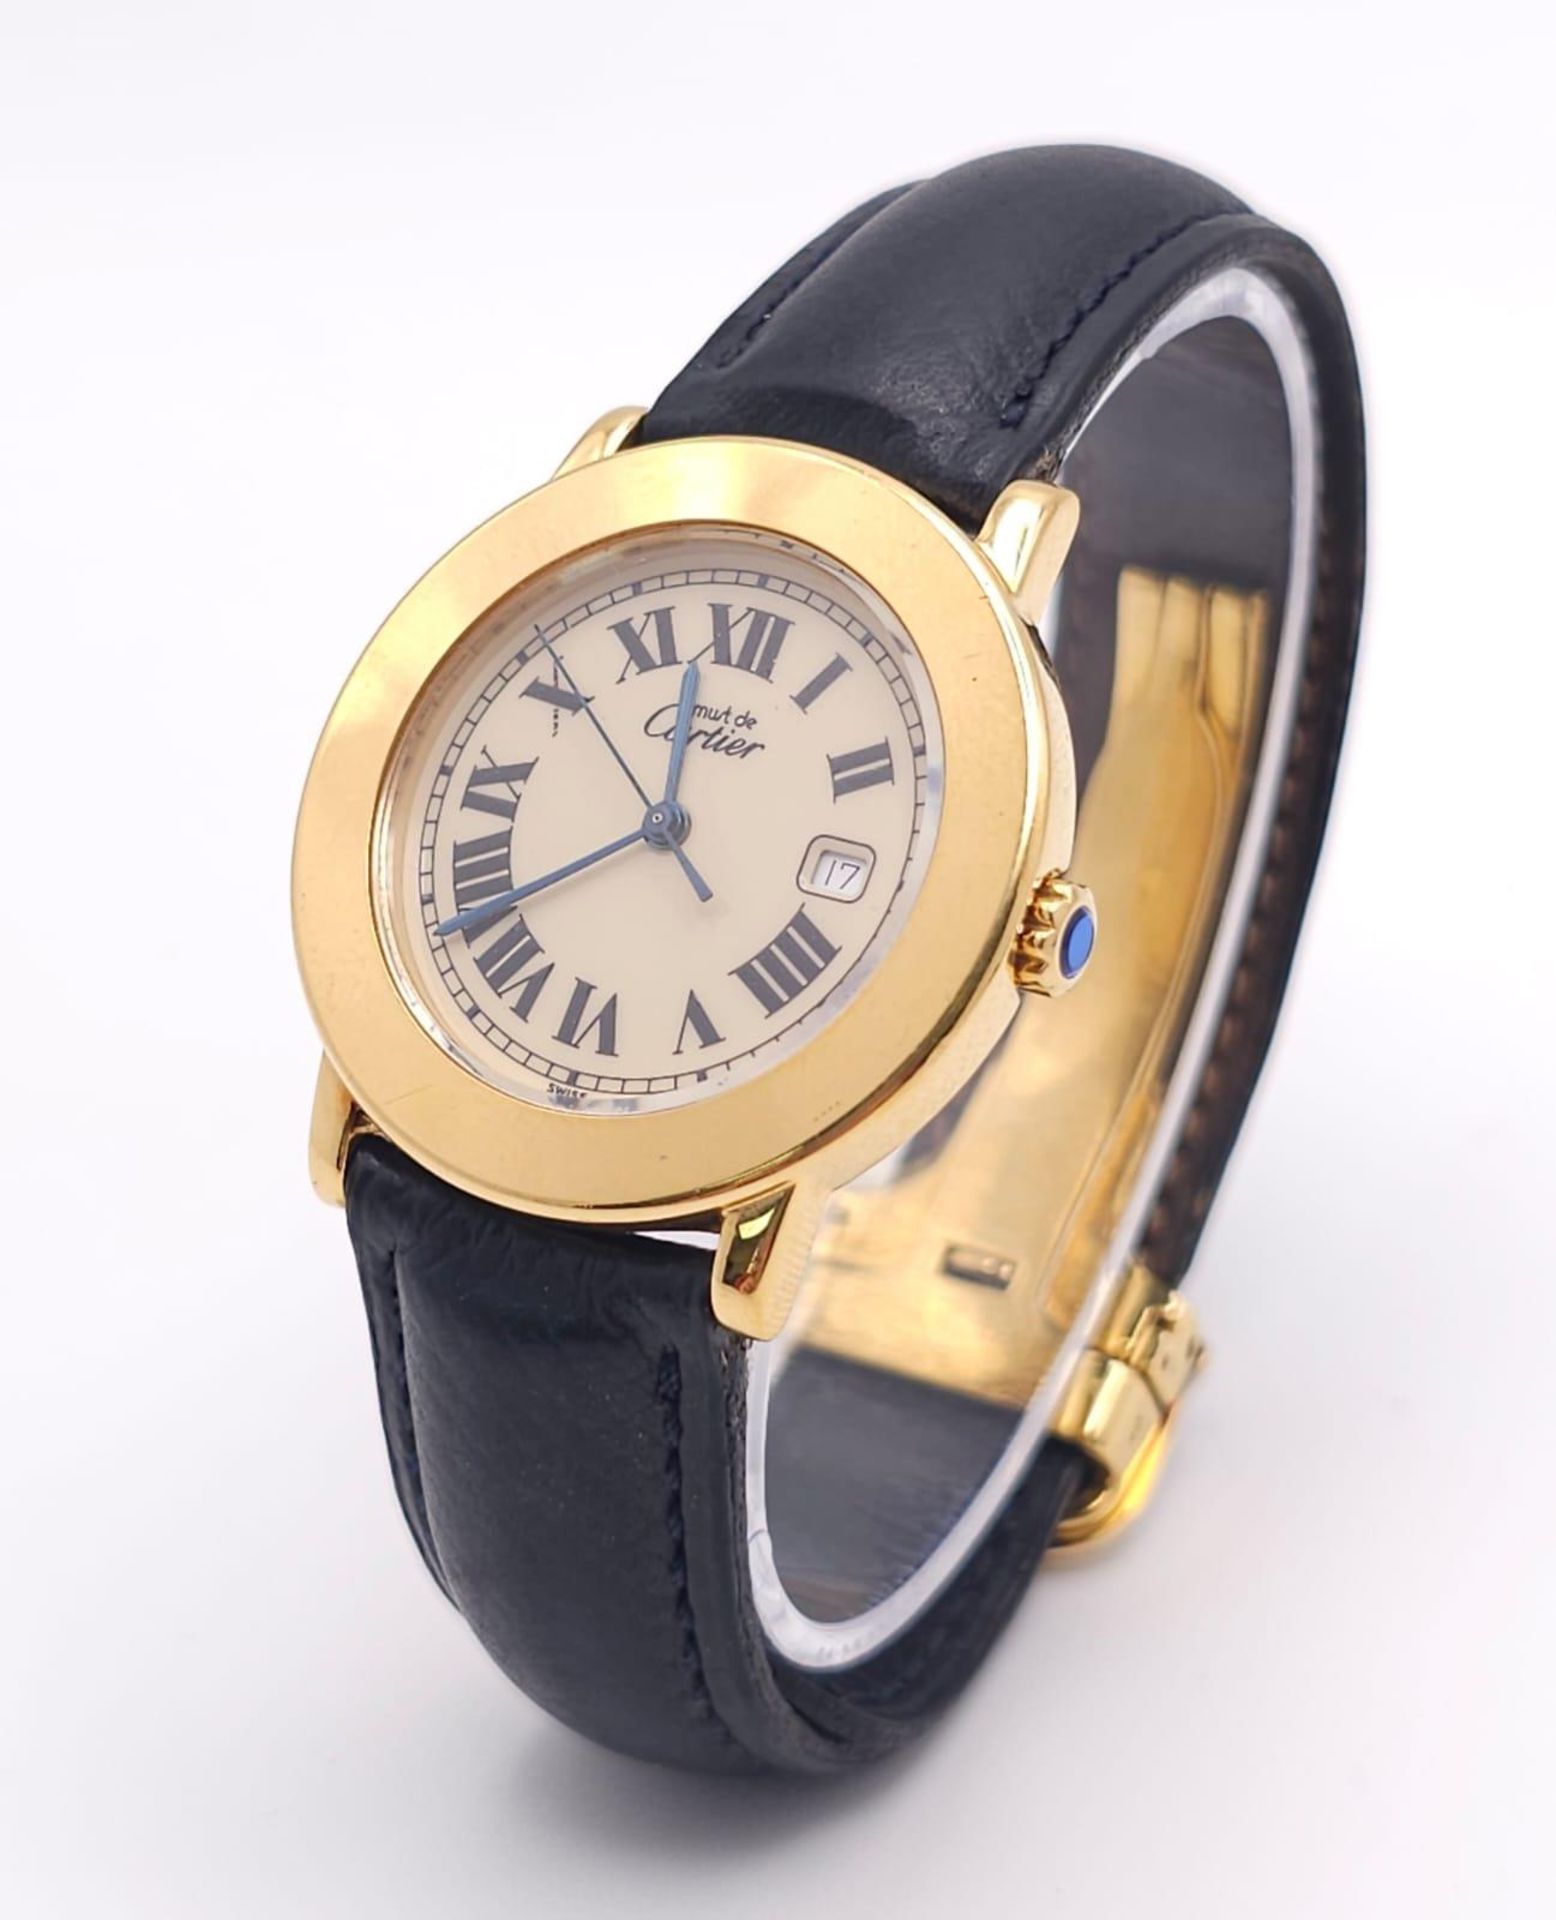 A Must De Cartier Gold Plated Silver Quartz Ladies Watch. Black leather strap. Gold plated silver